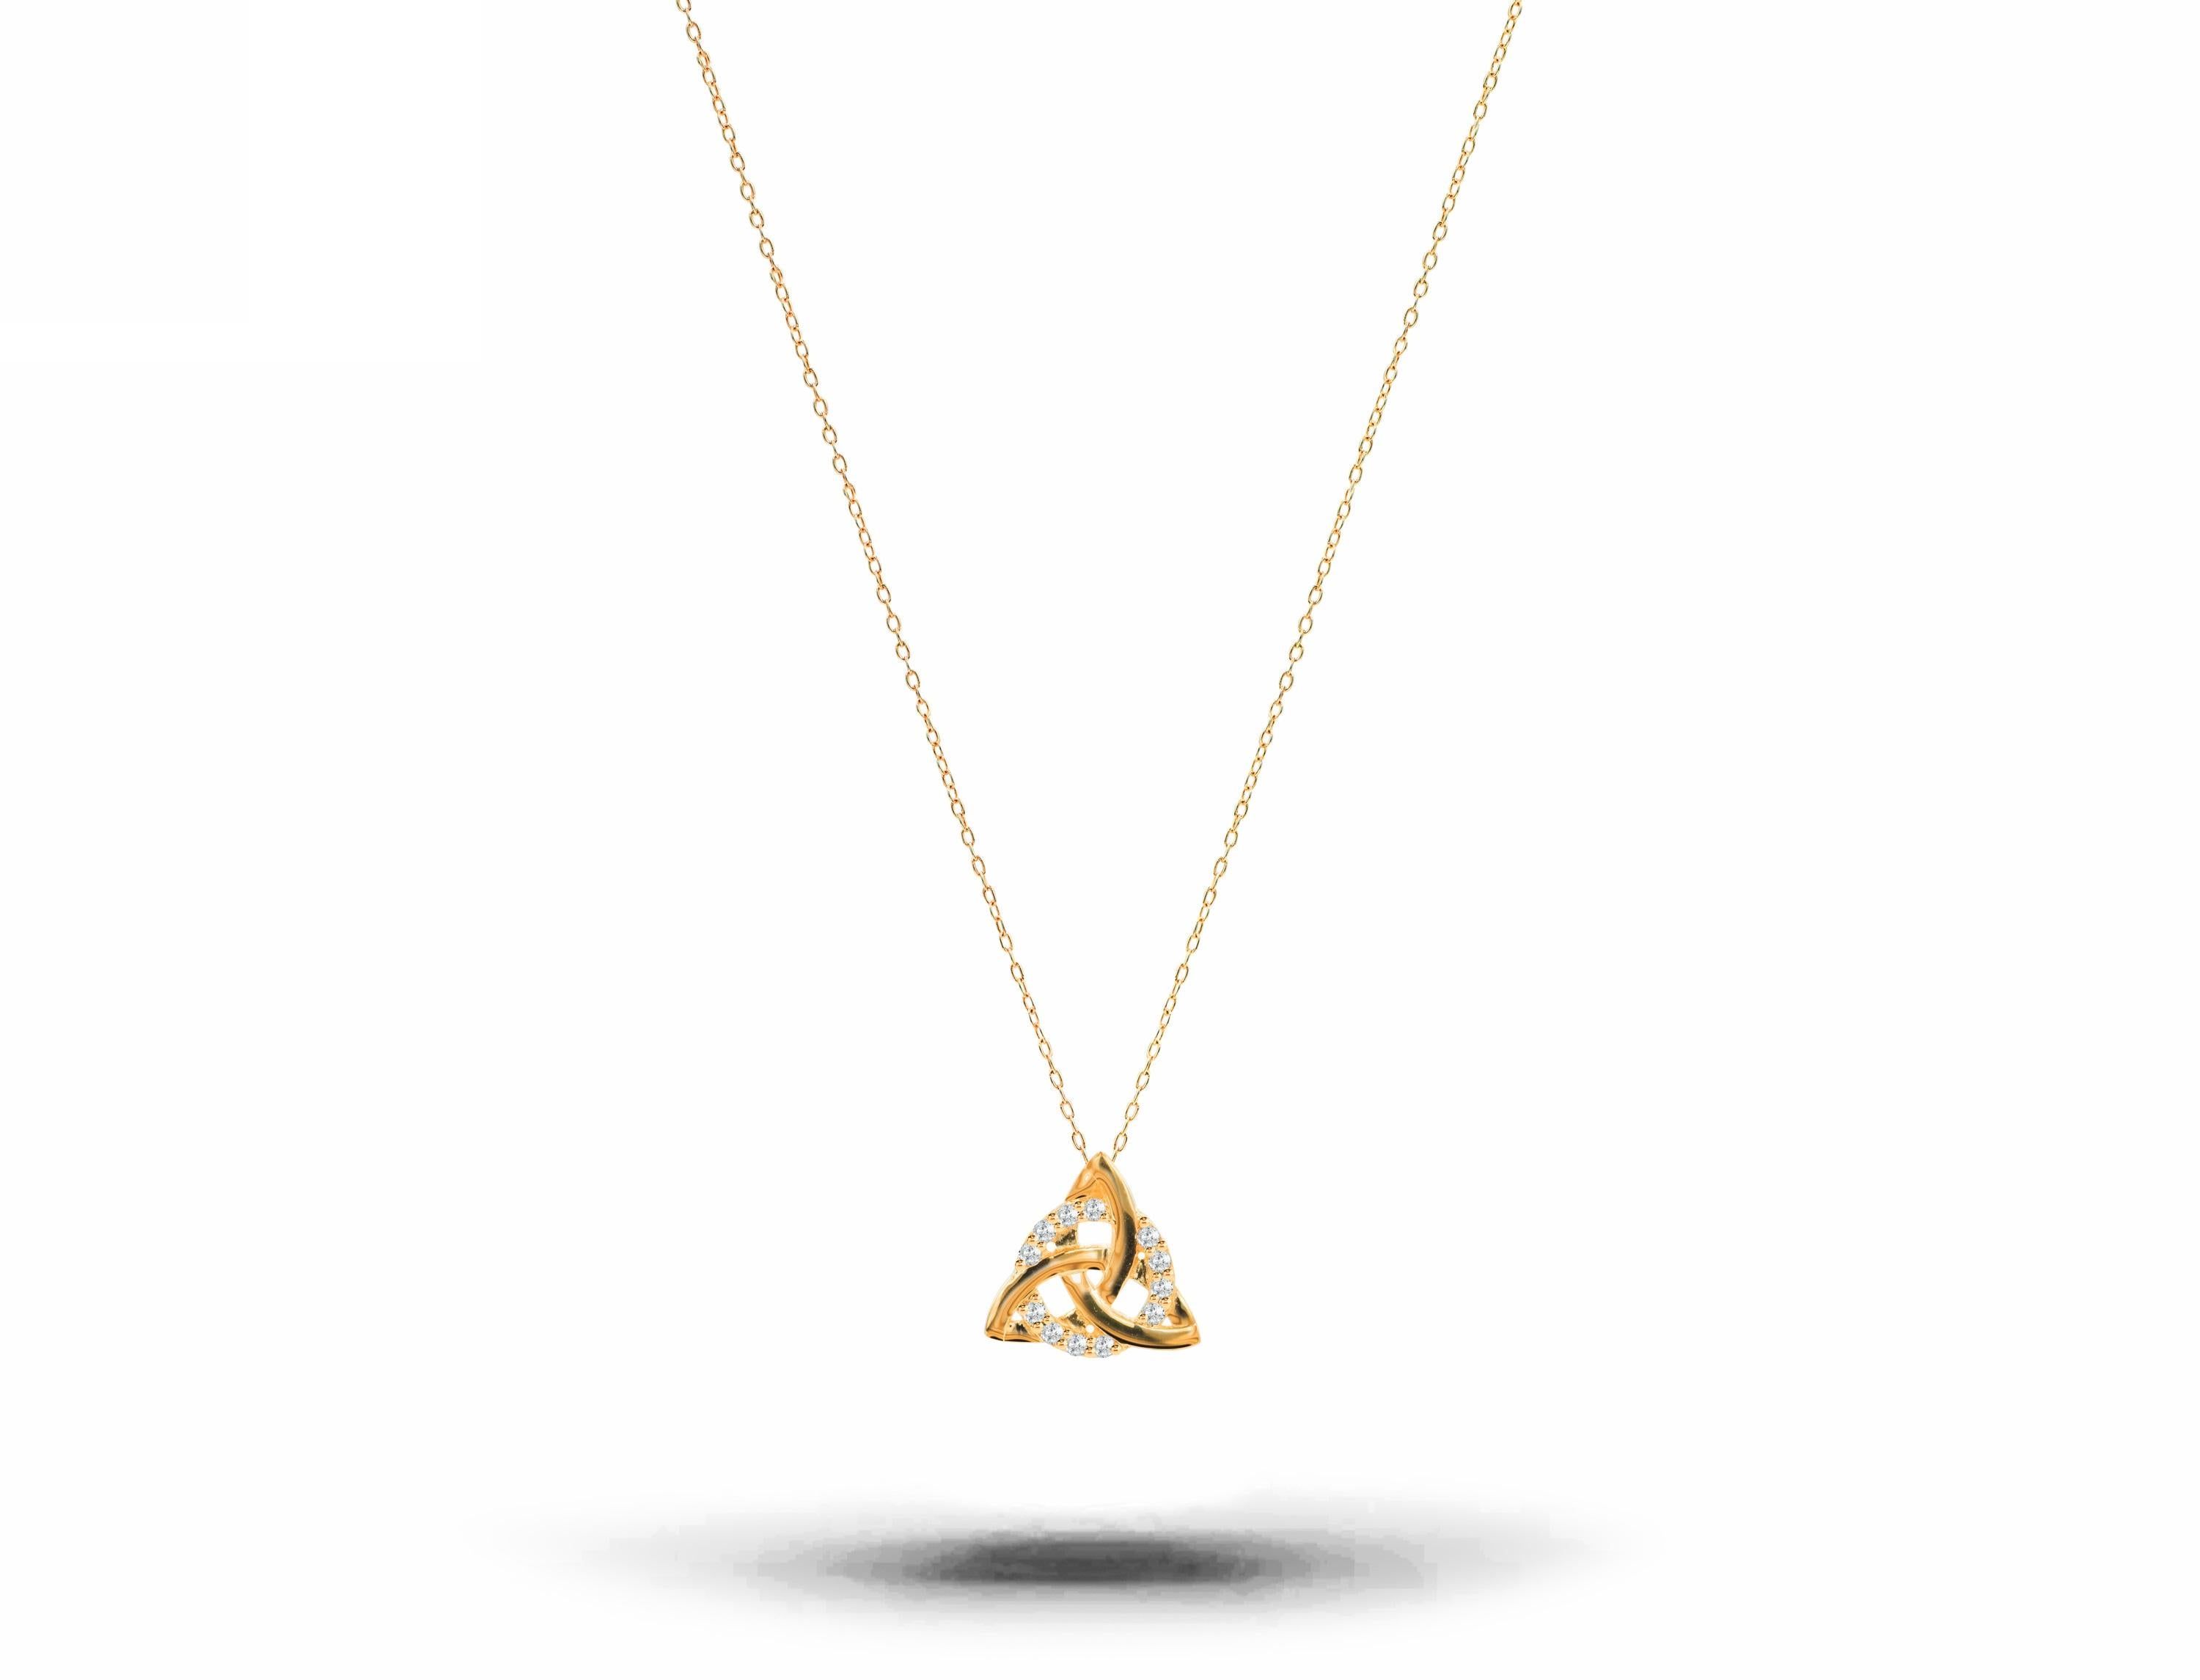 A beautiful little Celtic Knot Pendant is made of 18k solid gold available in three colors, White Gold / Rose Gold / Yellow Gold adorned with natural white round cut diamonds.

Perfect for wearing by itself for a minimal everyday style or layered